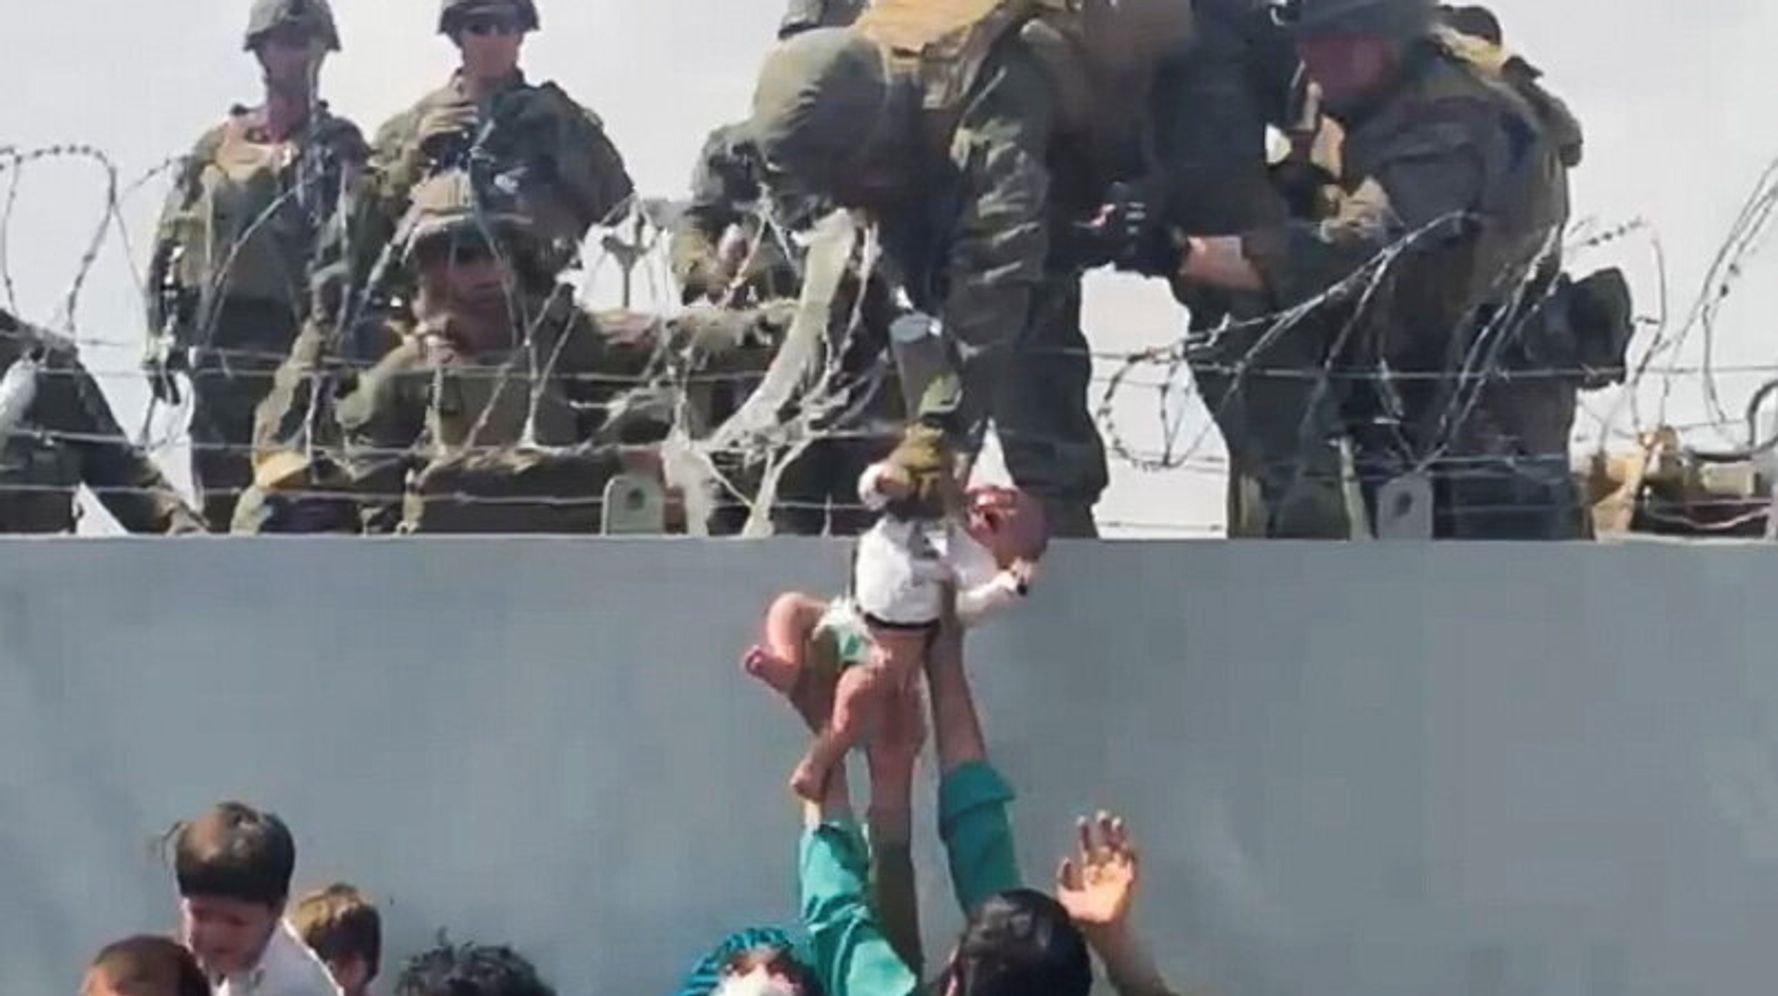 Afghans Photographed Handing Babies Over Barbed Wire To Soldiers At Airport